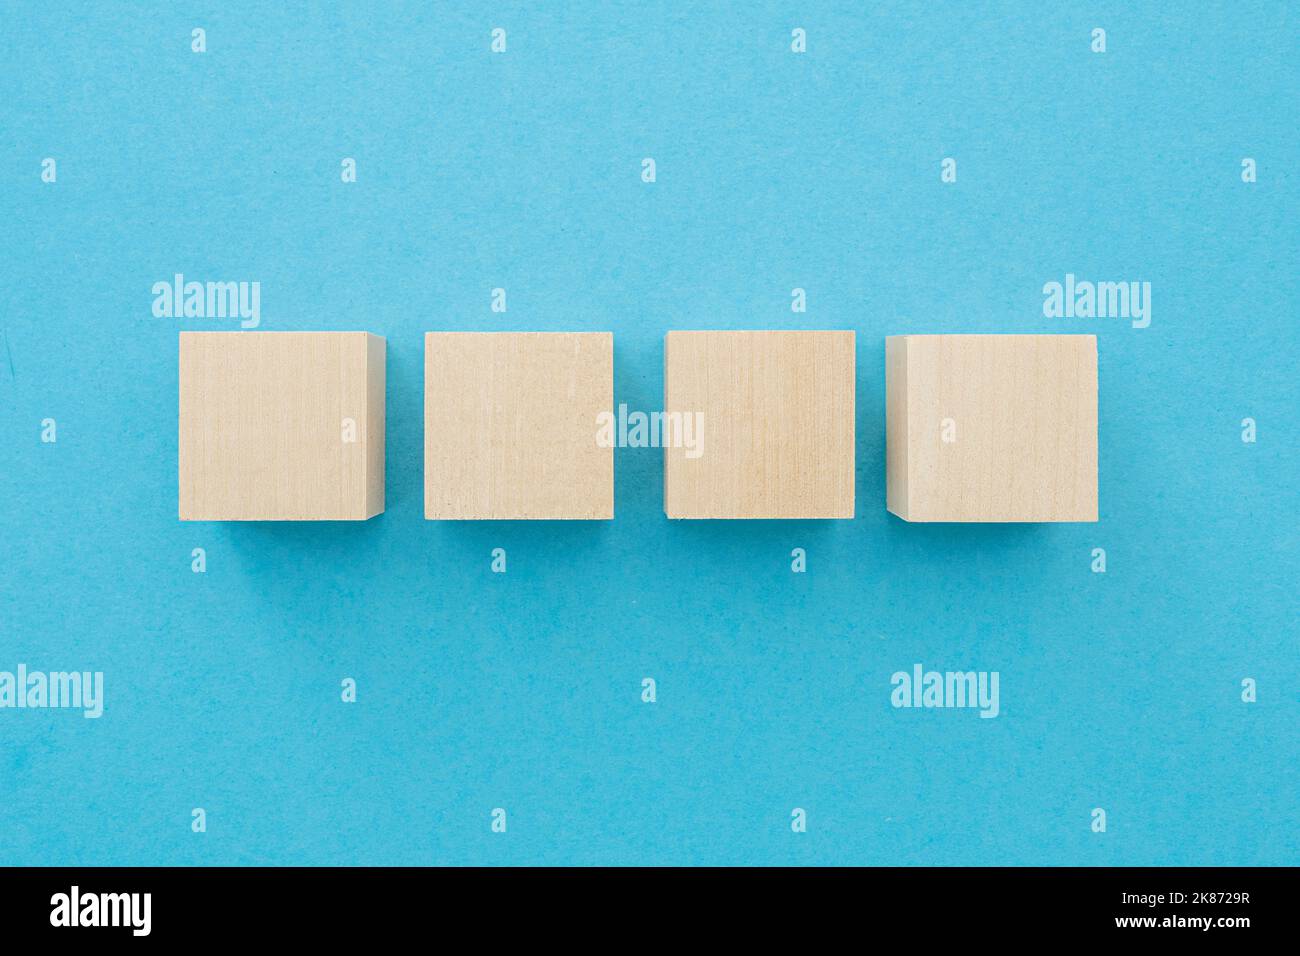 Four wooden cubes, square shape with blank surface on blue background, for business concept ideas Stock Photo